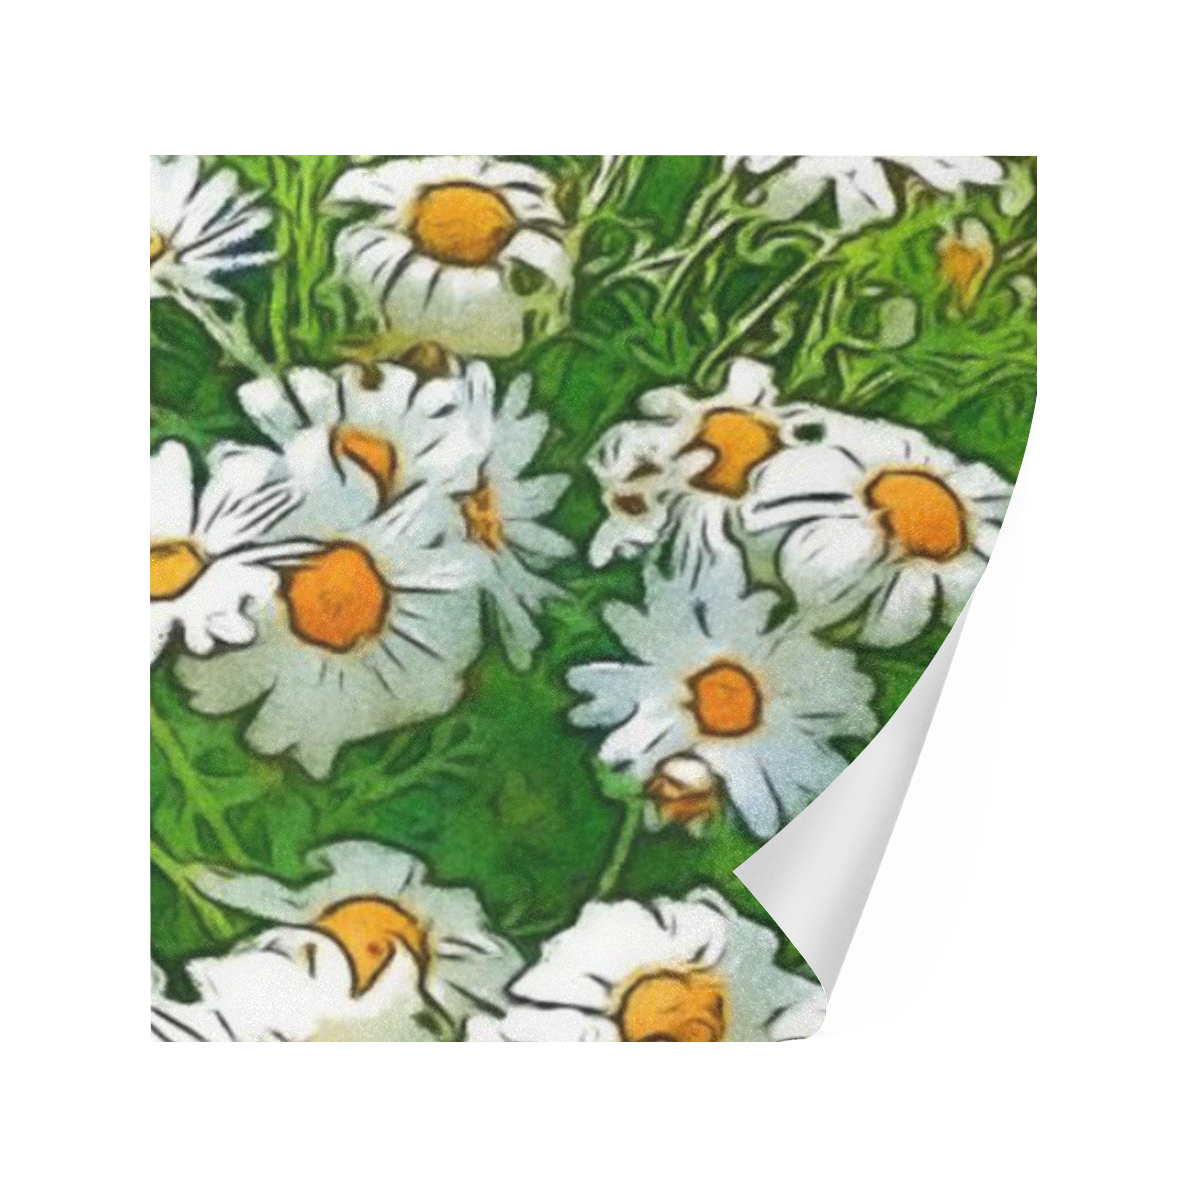 Floral ArtStudio 36A by JamColors Gift Wrapping Paper 58"x 23" (2 Rolls)